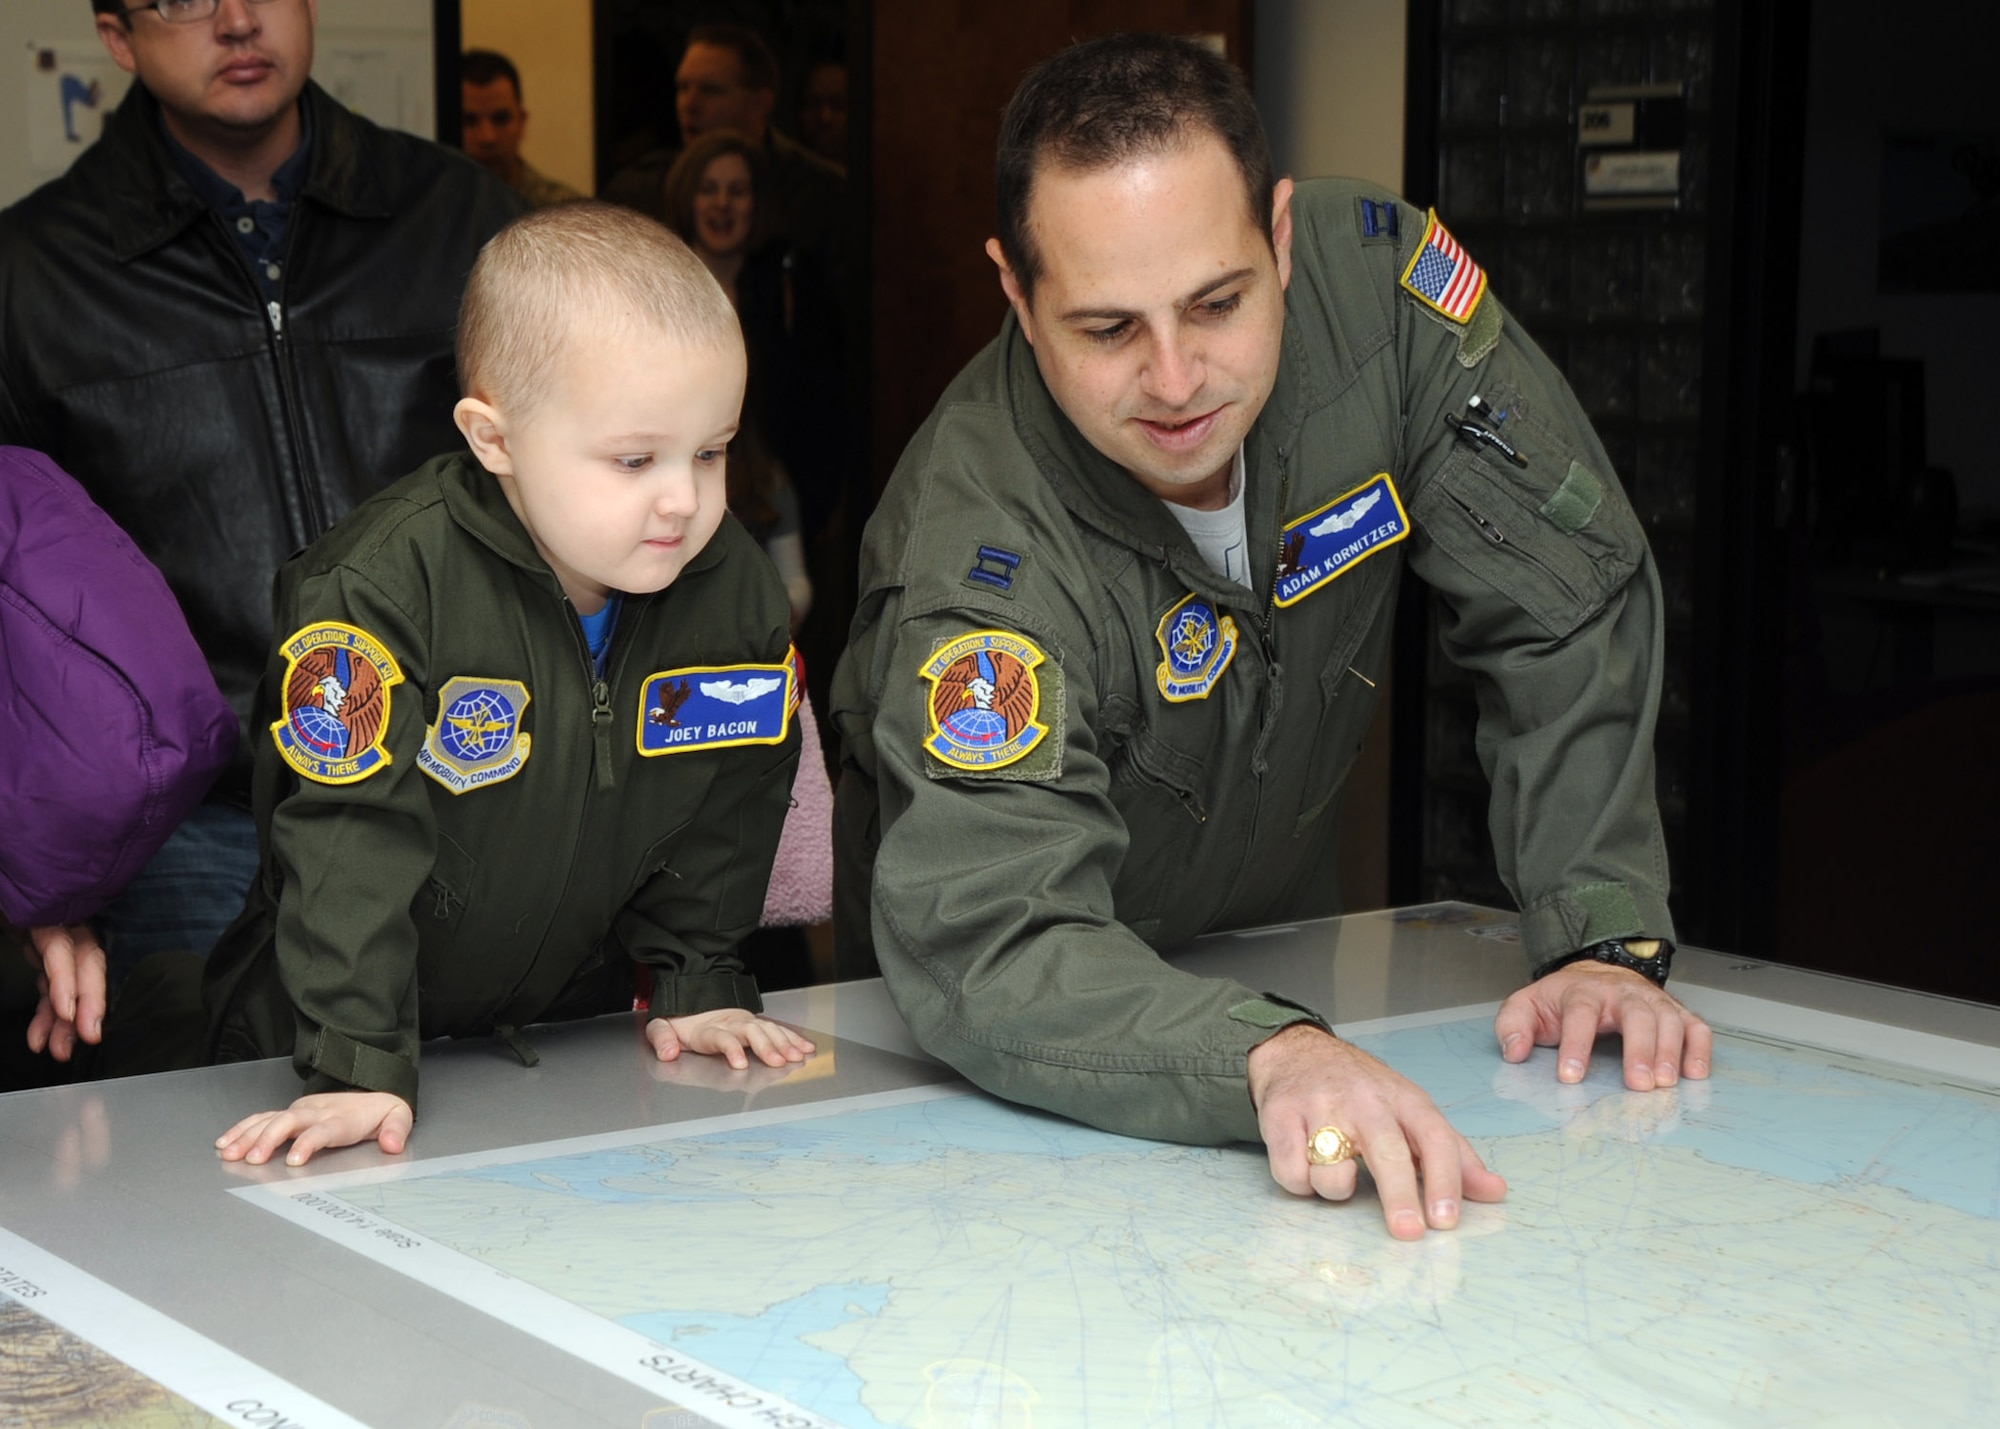 Capt. Adam Kornitzer, 22nd Operations Support Squadron flight instructor, shows 5-year-old Joey Bacon, Pilot for a Day recipient, a map of the United States while explaining the 22nd OSS’s missions Dec. 10, 2010, McConnell Air Force Base, Kan. Joey, who has been diagnosed with leukemia, was invited to the base by members of the 22nd OSS as part of the Pilot For a Day program, an Air Force program that allows medically-challenged youth a chance to visit the base and participate in base operations. (U.S. Air Force photo/Staff Sgt. Dallas Edwards